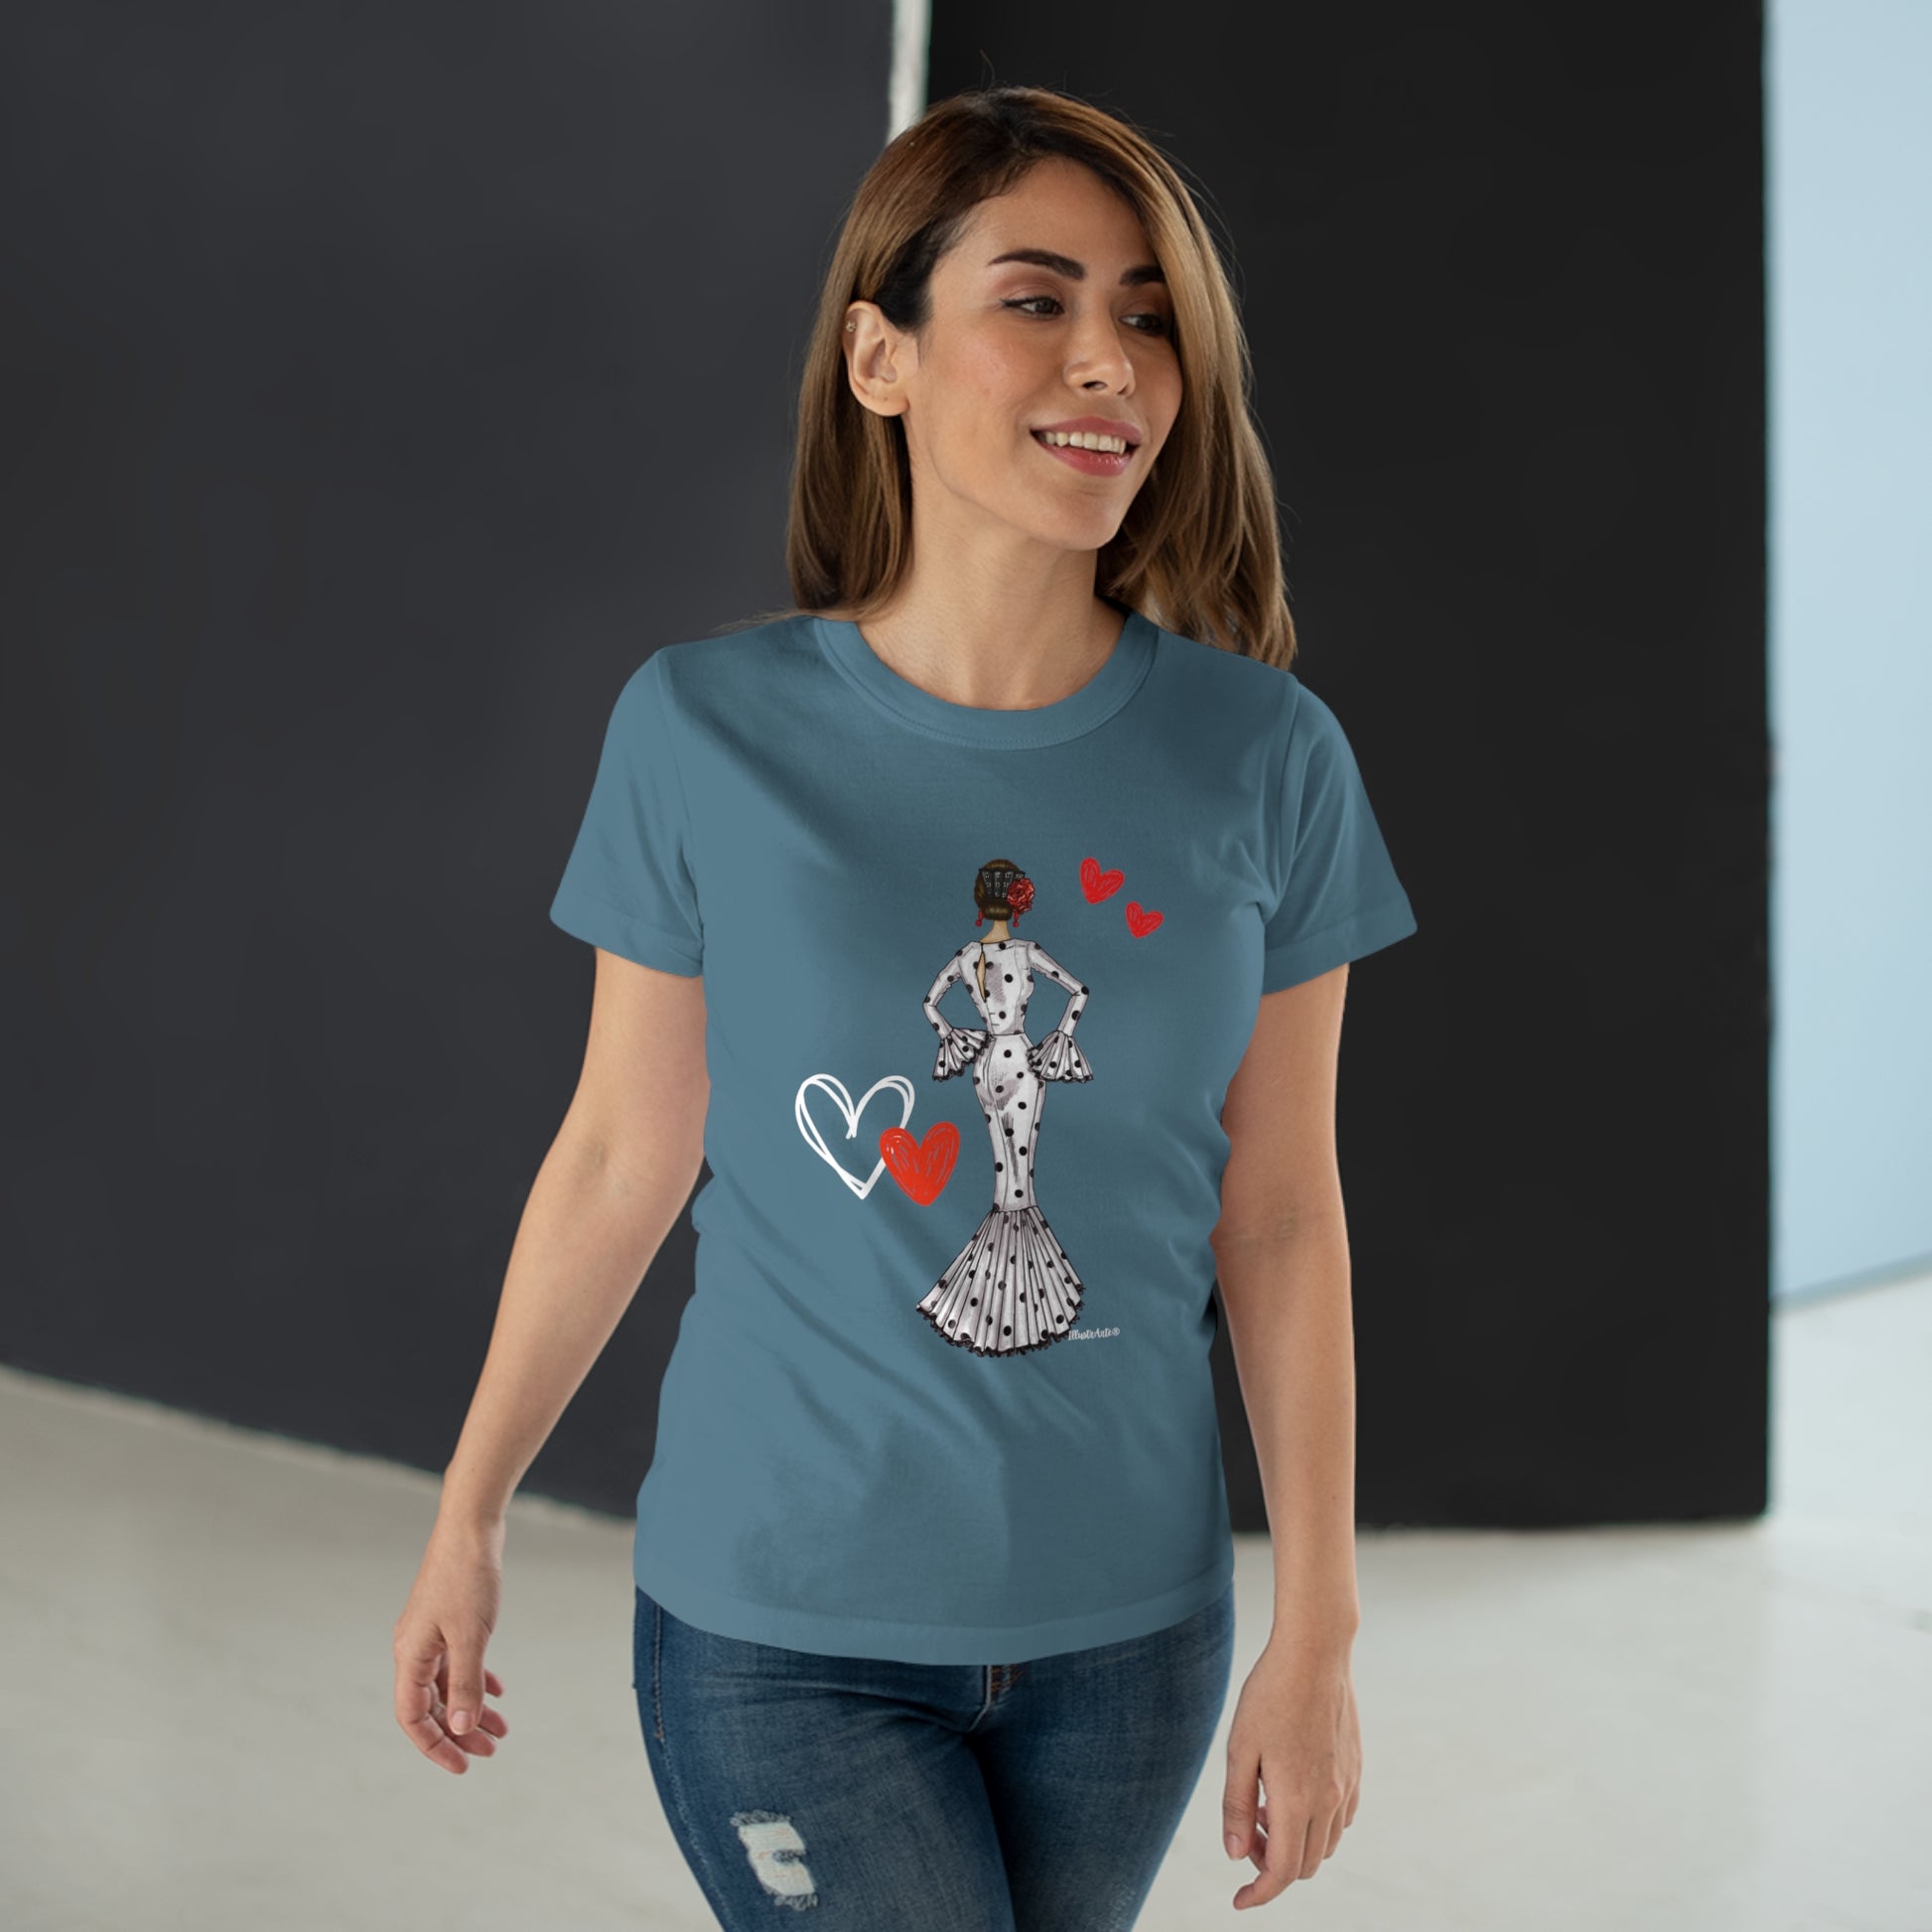 a woman wearing a t - shirt with a heart on it